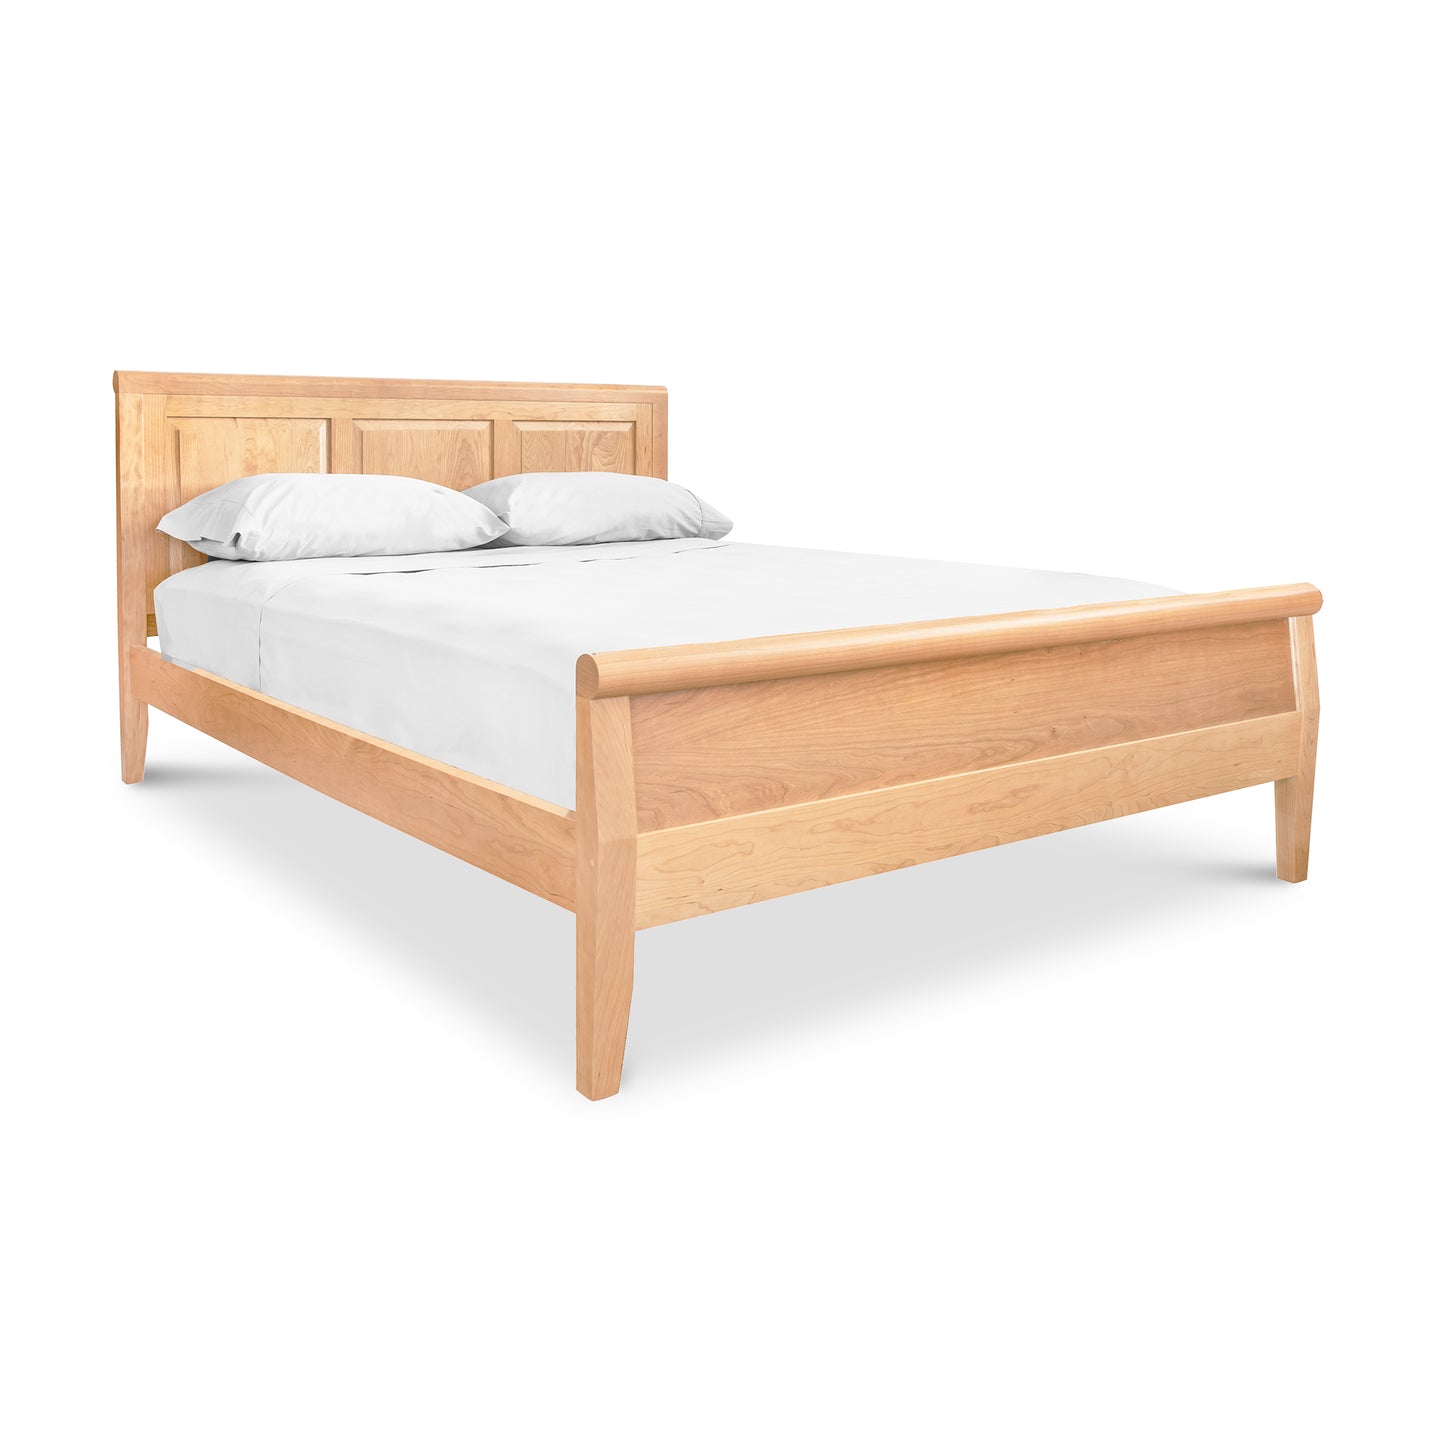 A Lyndon Furniture Raised Panel Carriage High Footboard bed made of solid hardwood, featuring white sheets.